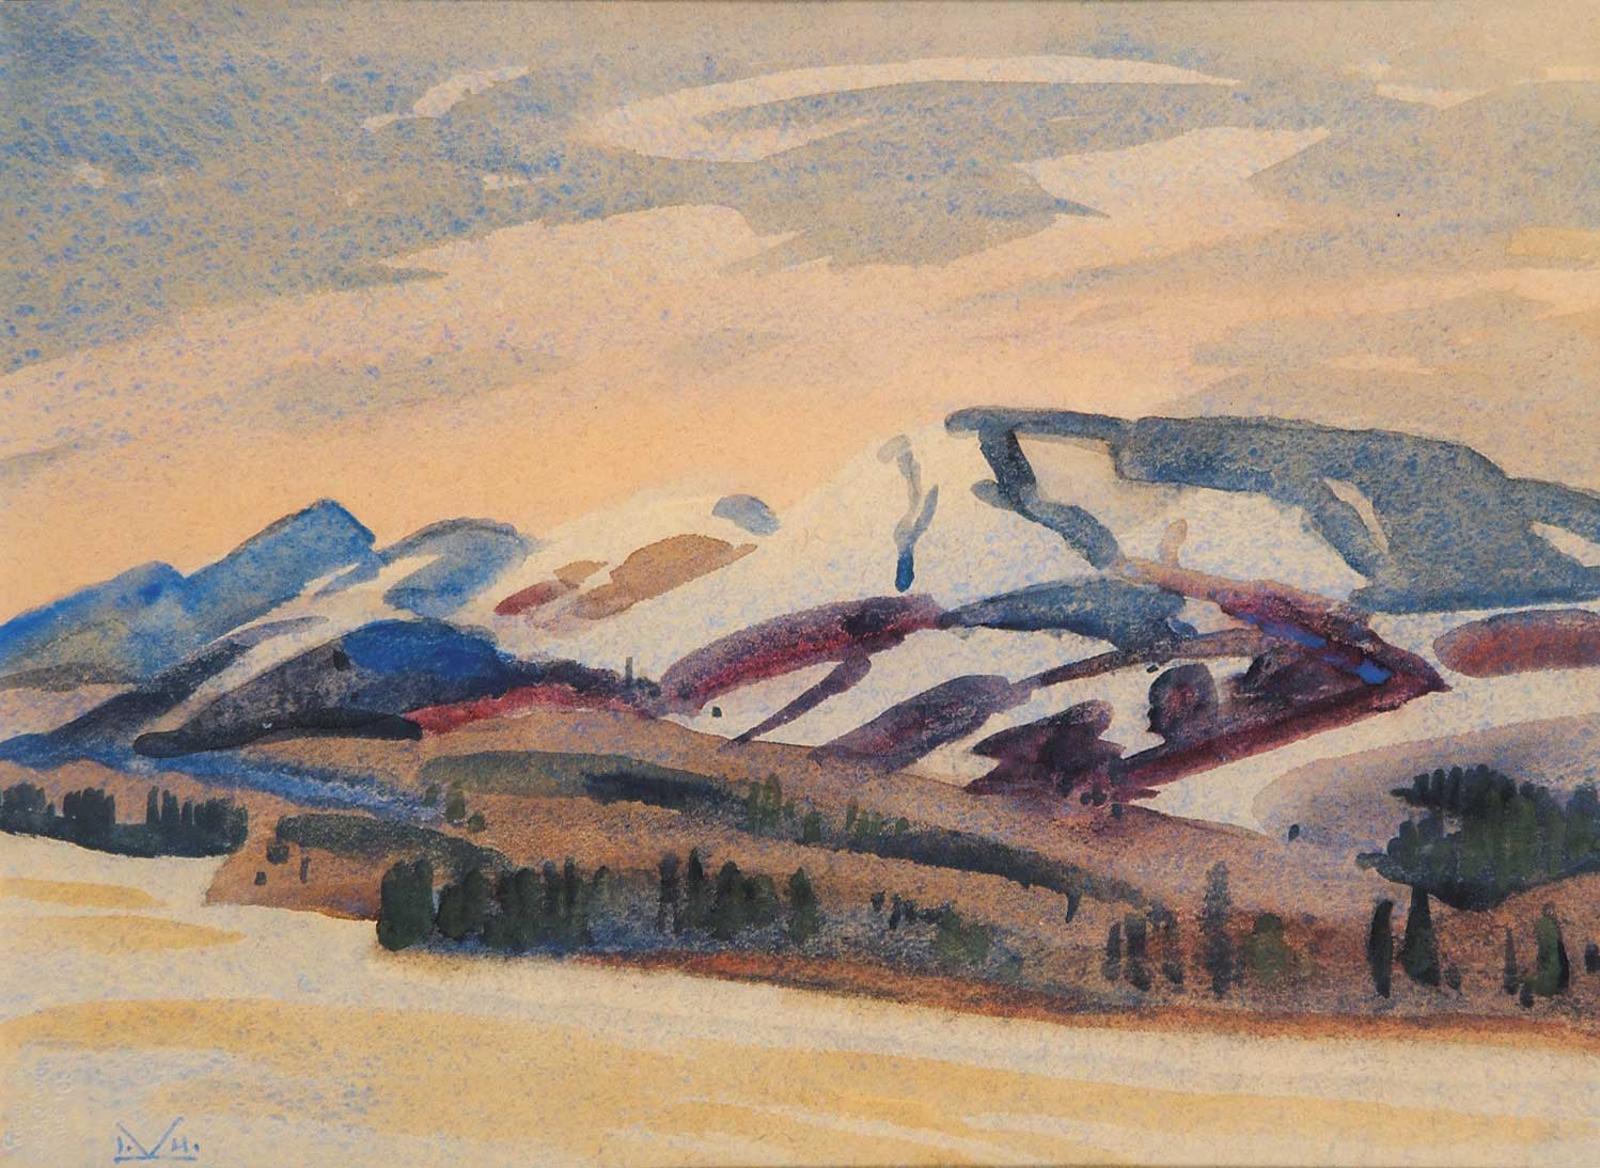 Illingworth Holey (Buck) Kerr (1905-1989) - Square Butte, West of Millarville